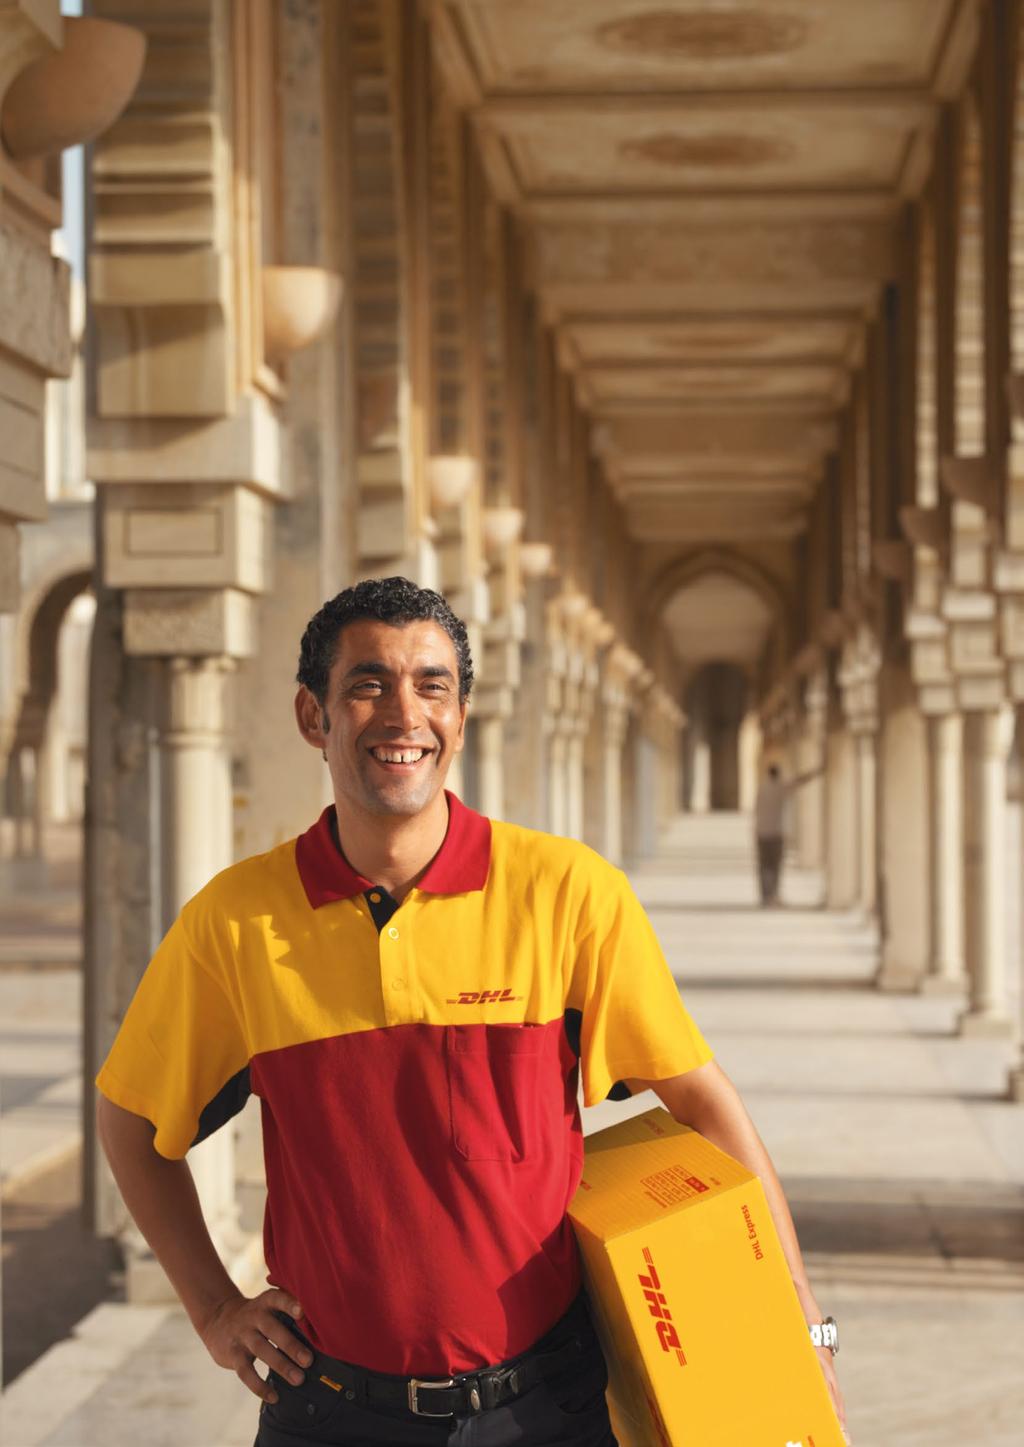 DHL Express Excellence. Simply delivered.